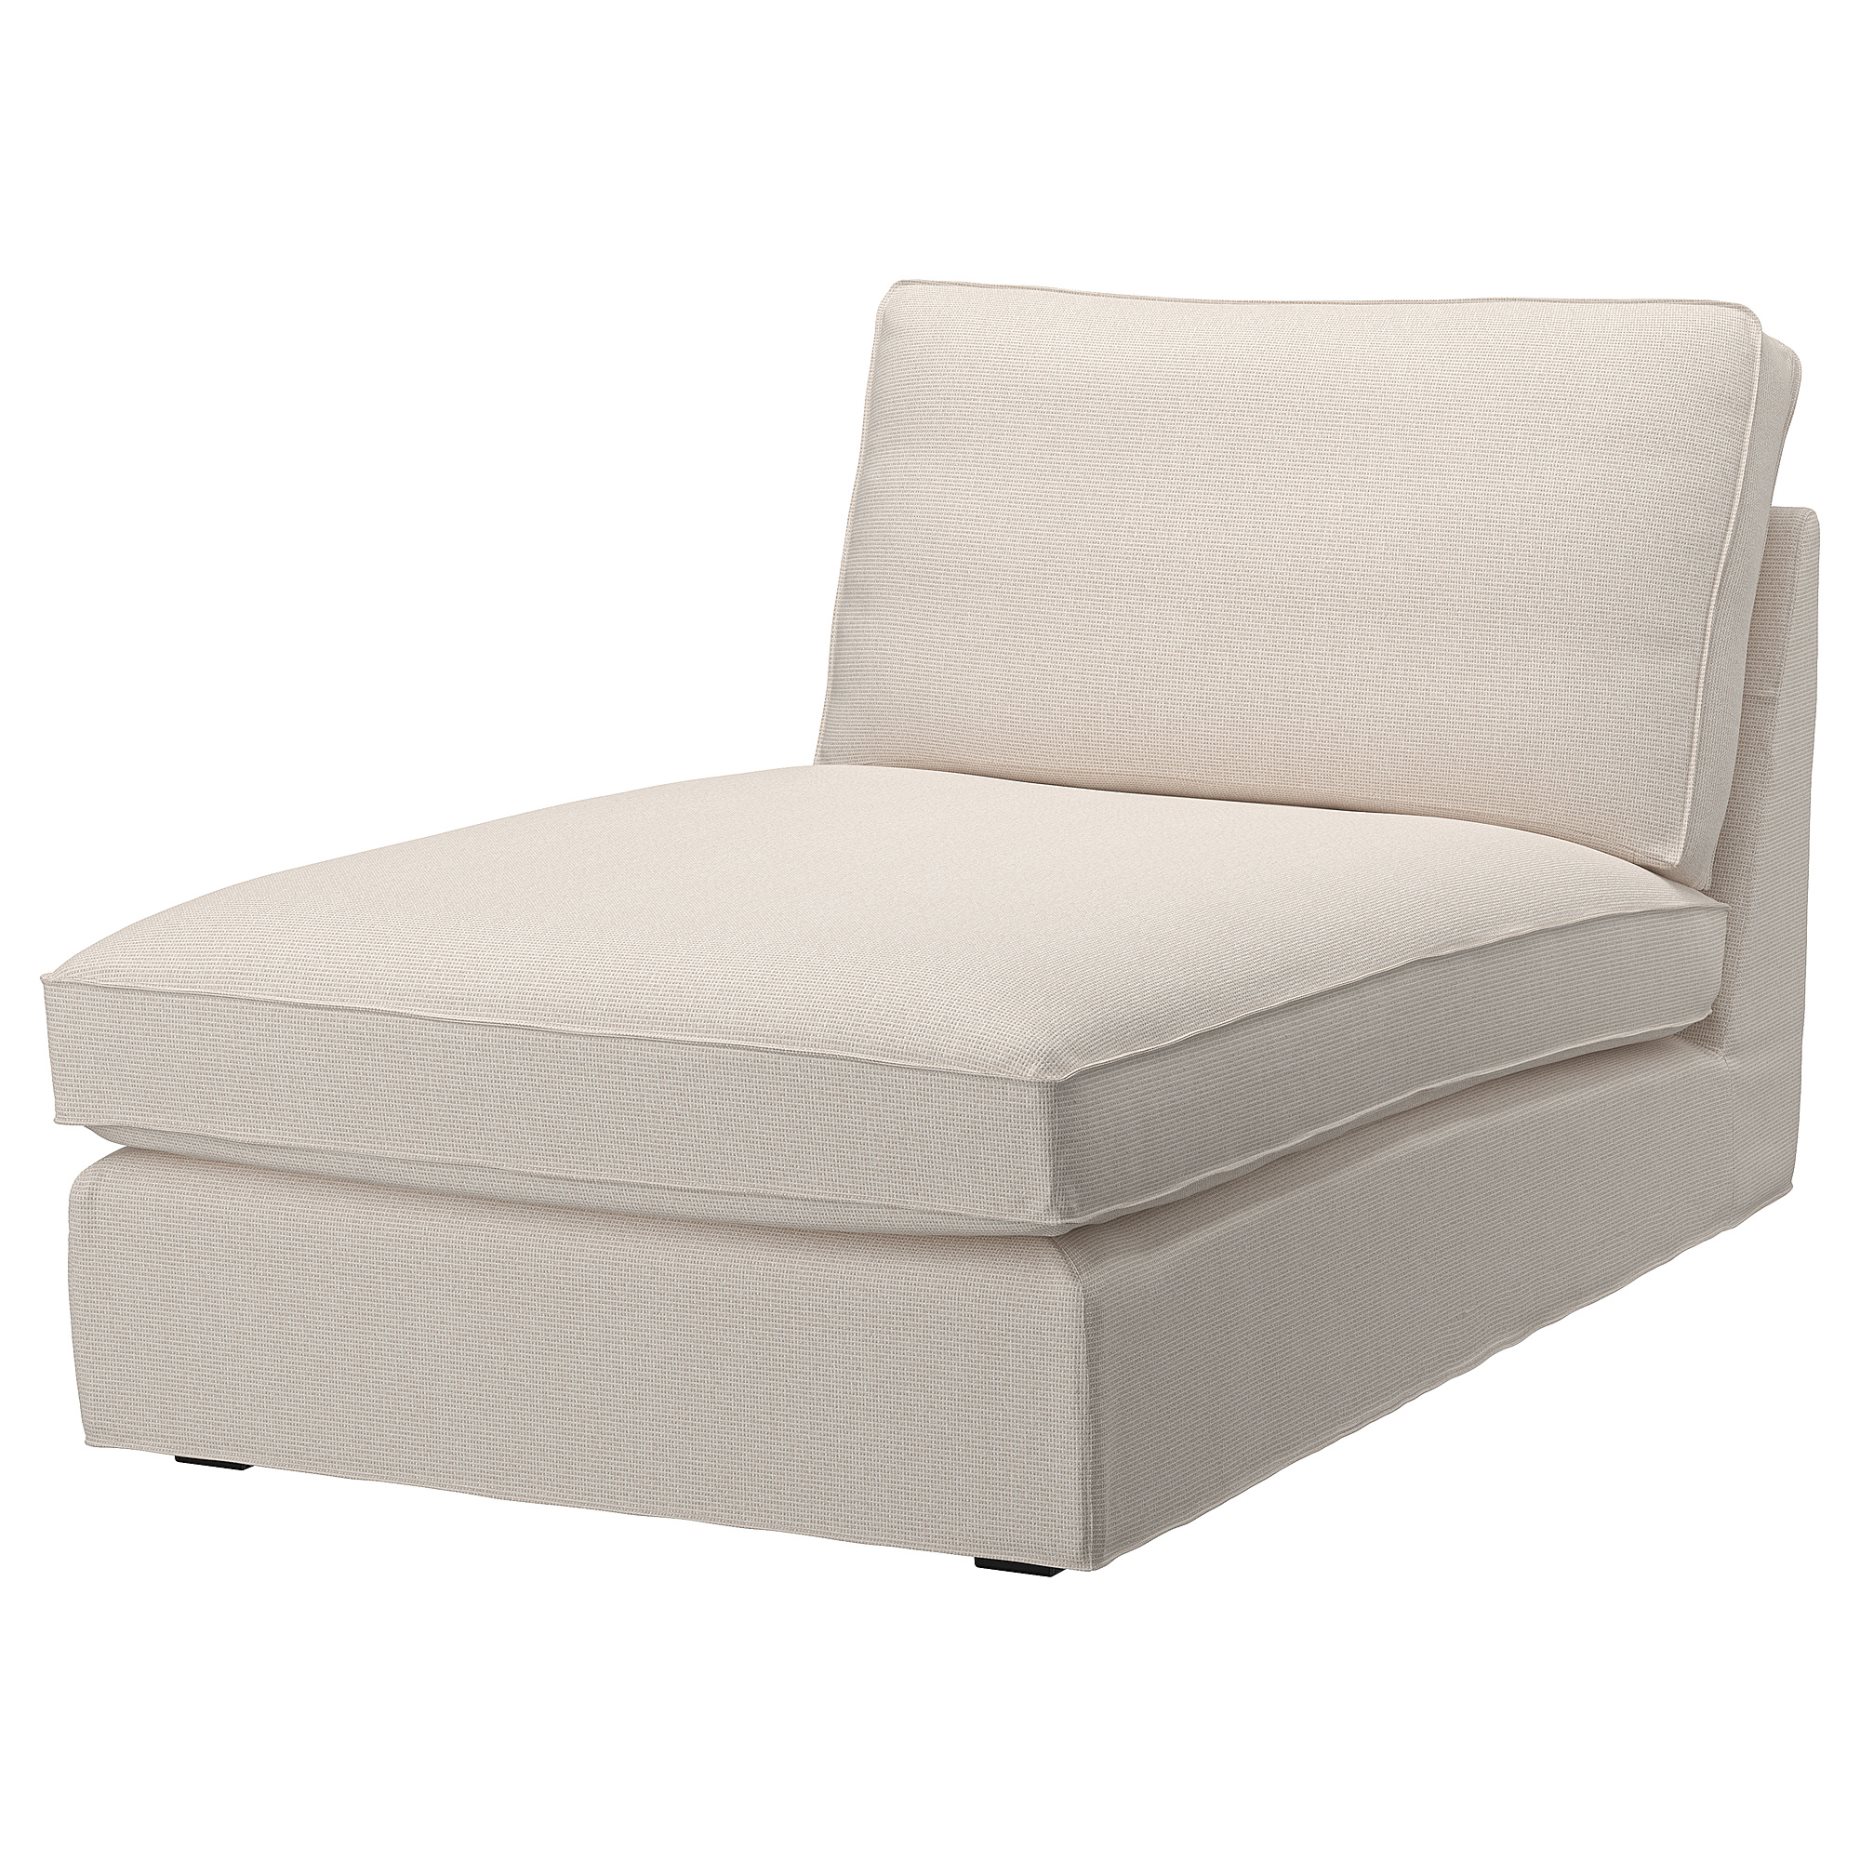 KIVIK, cover for chaise longue, 605.275.32